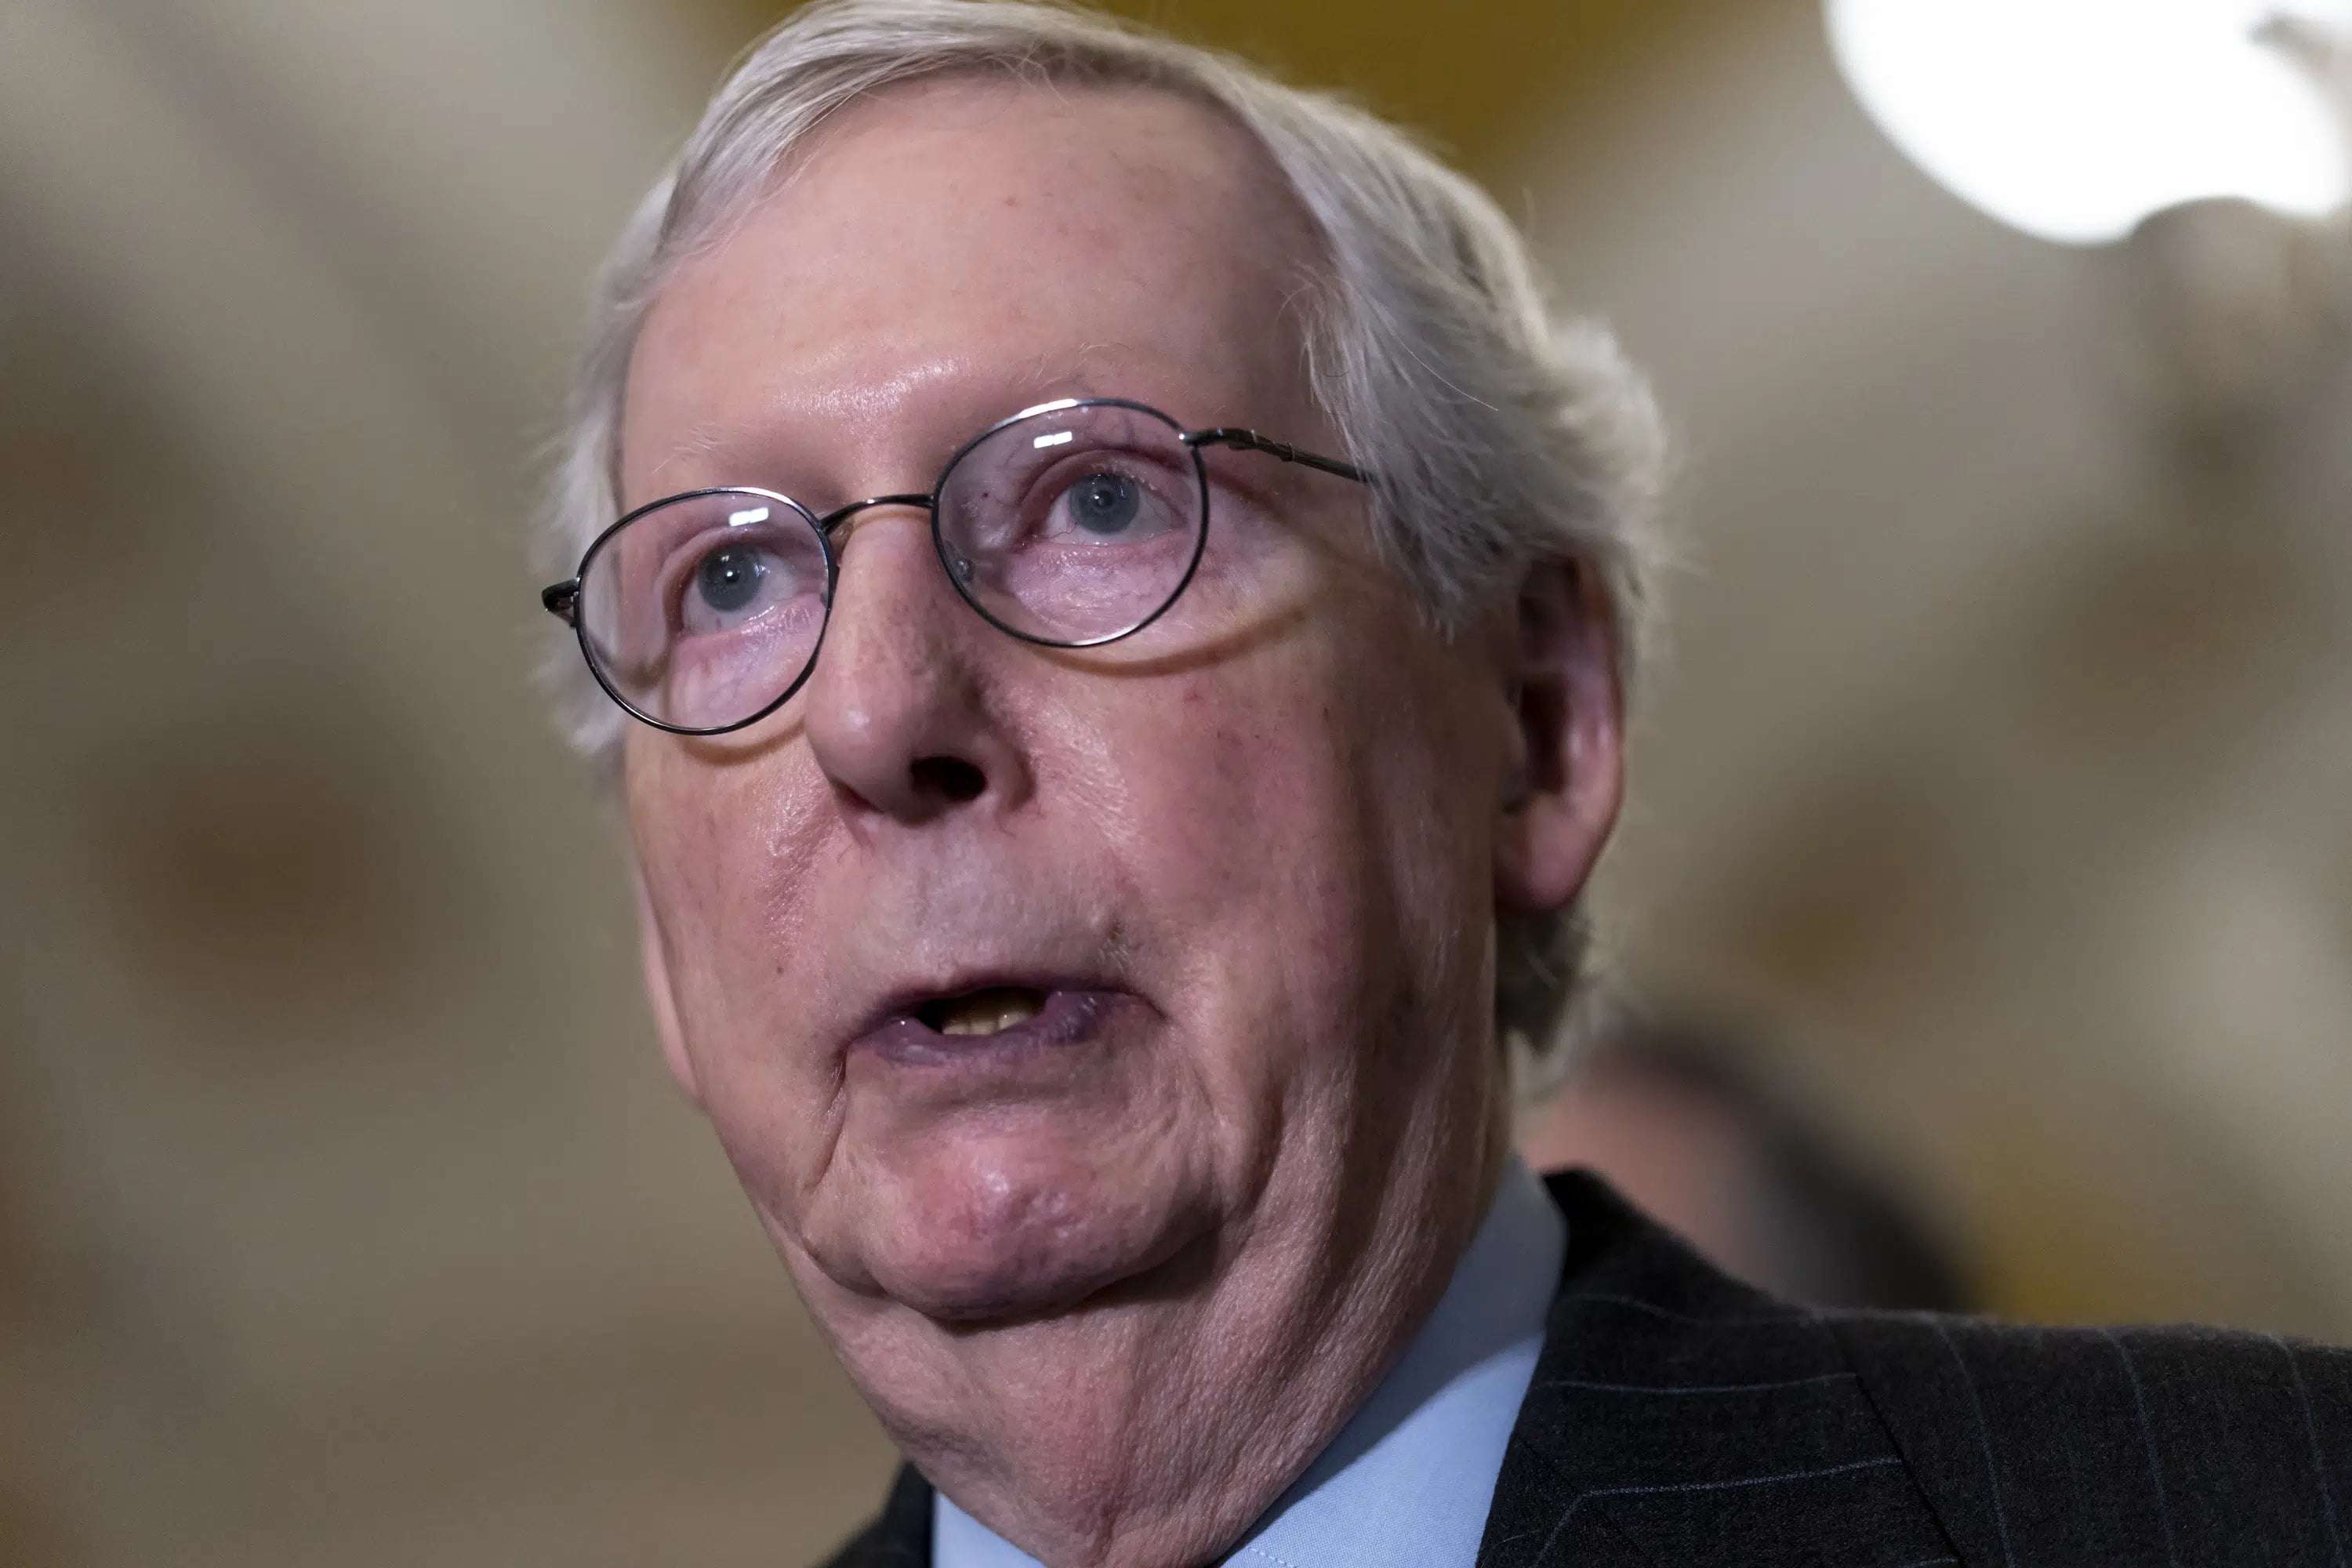 image for GOP Leader McConnell remains in hospital after concussion